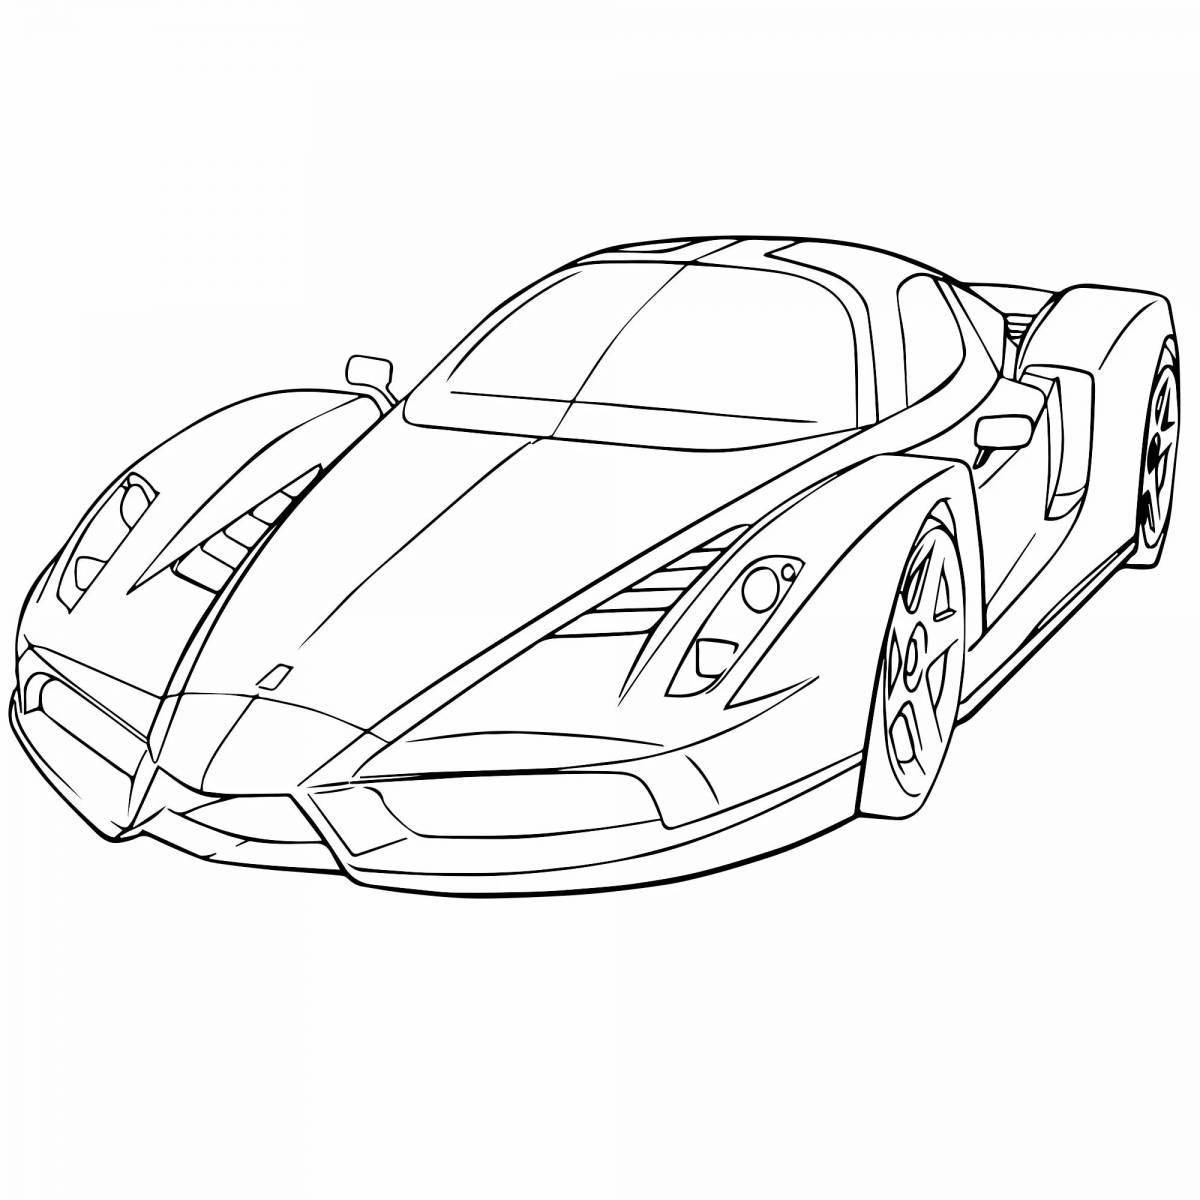 Amazing coloring of hypercars